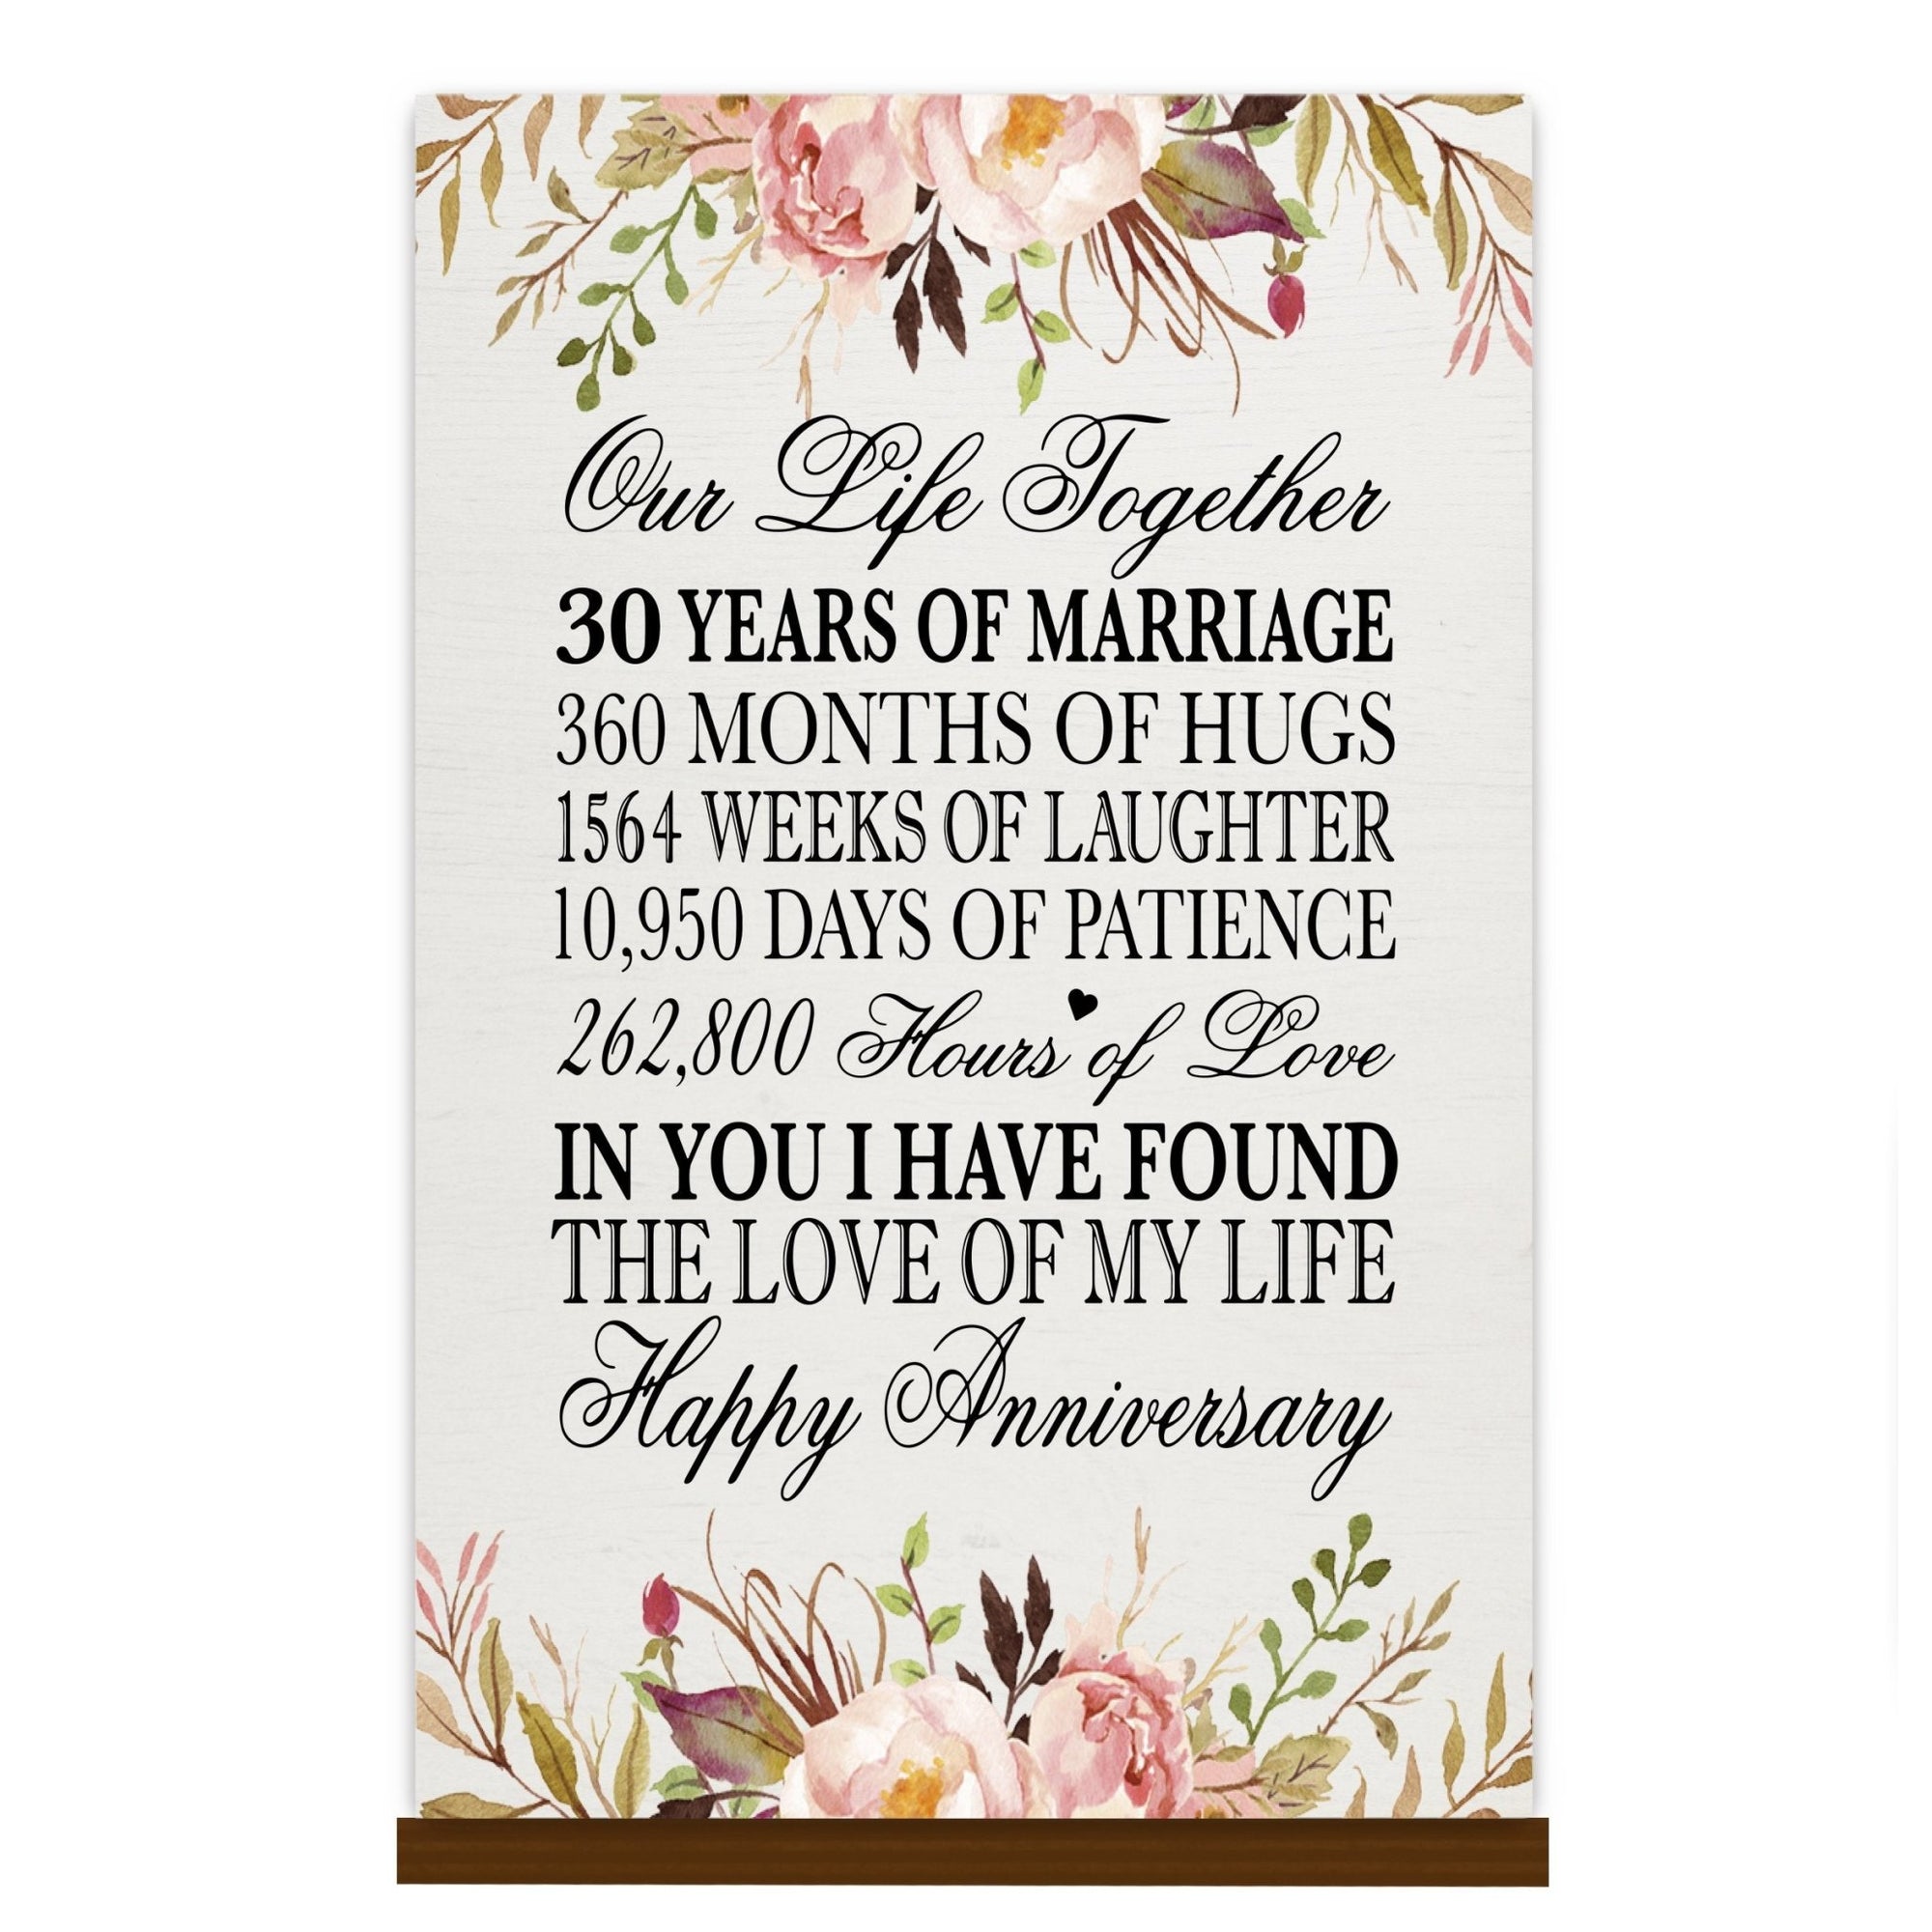 LifeSong Milestones 30th Anniversary Wall Plaque for Couples